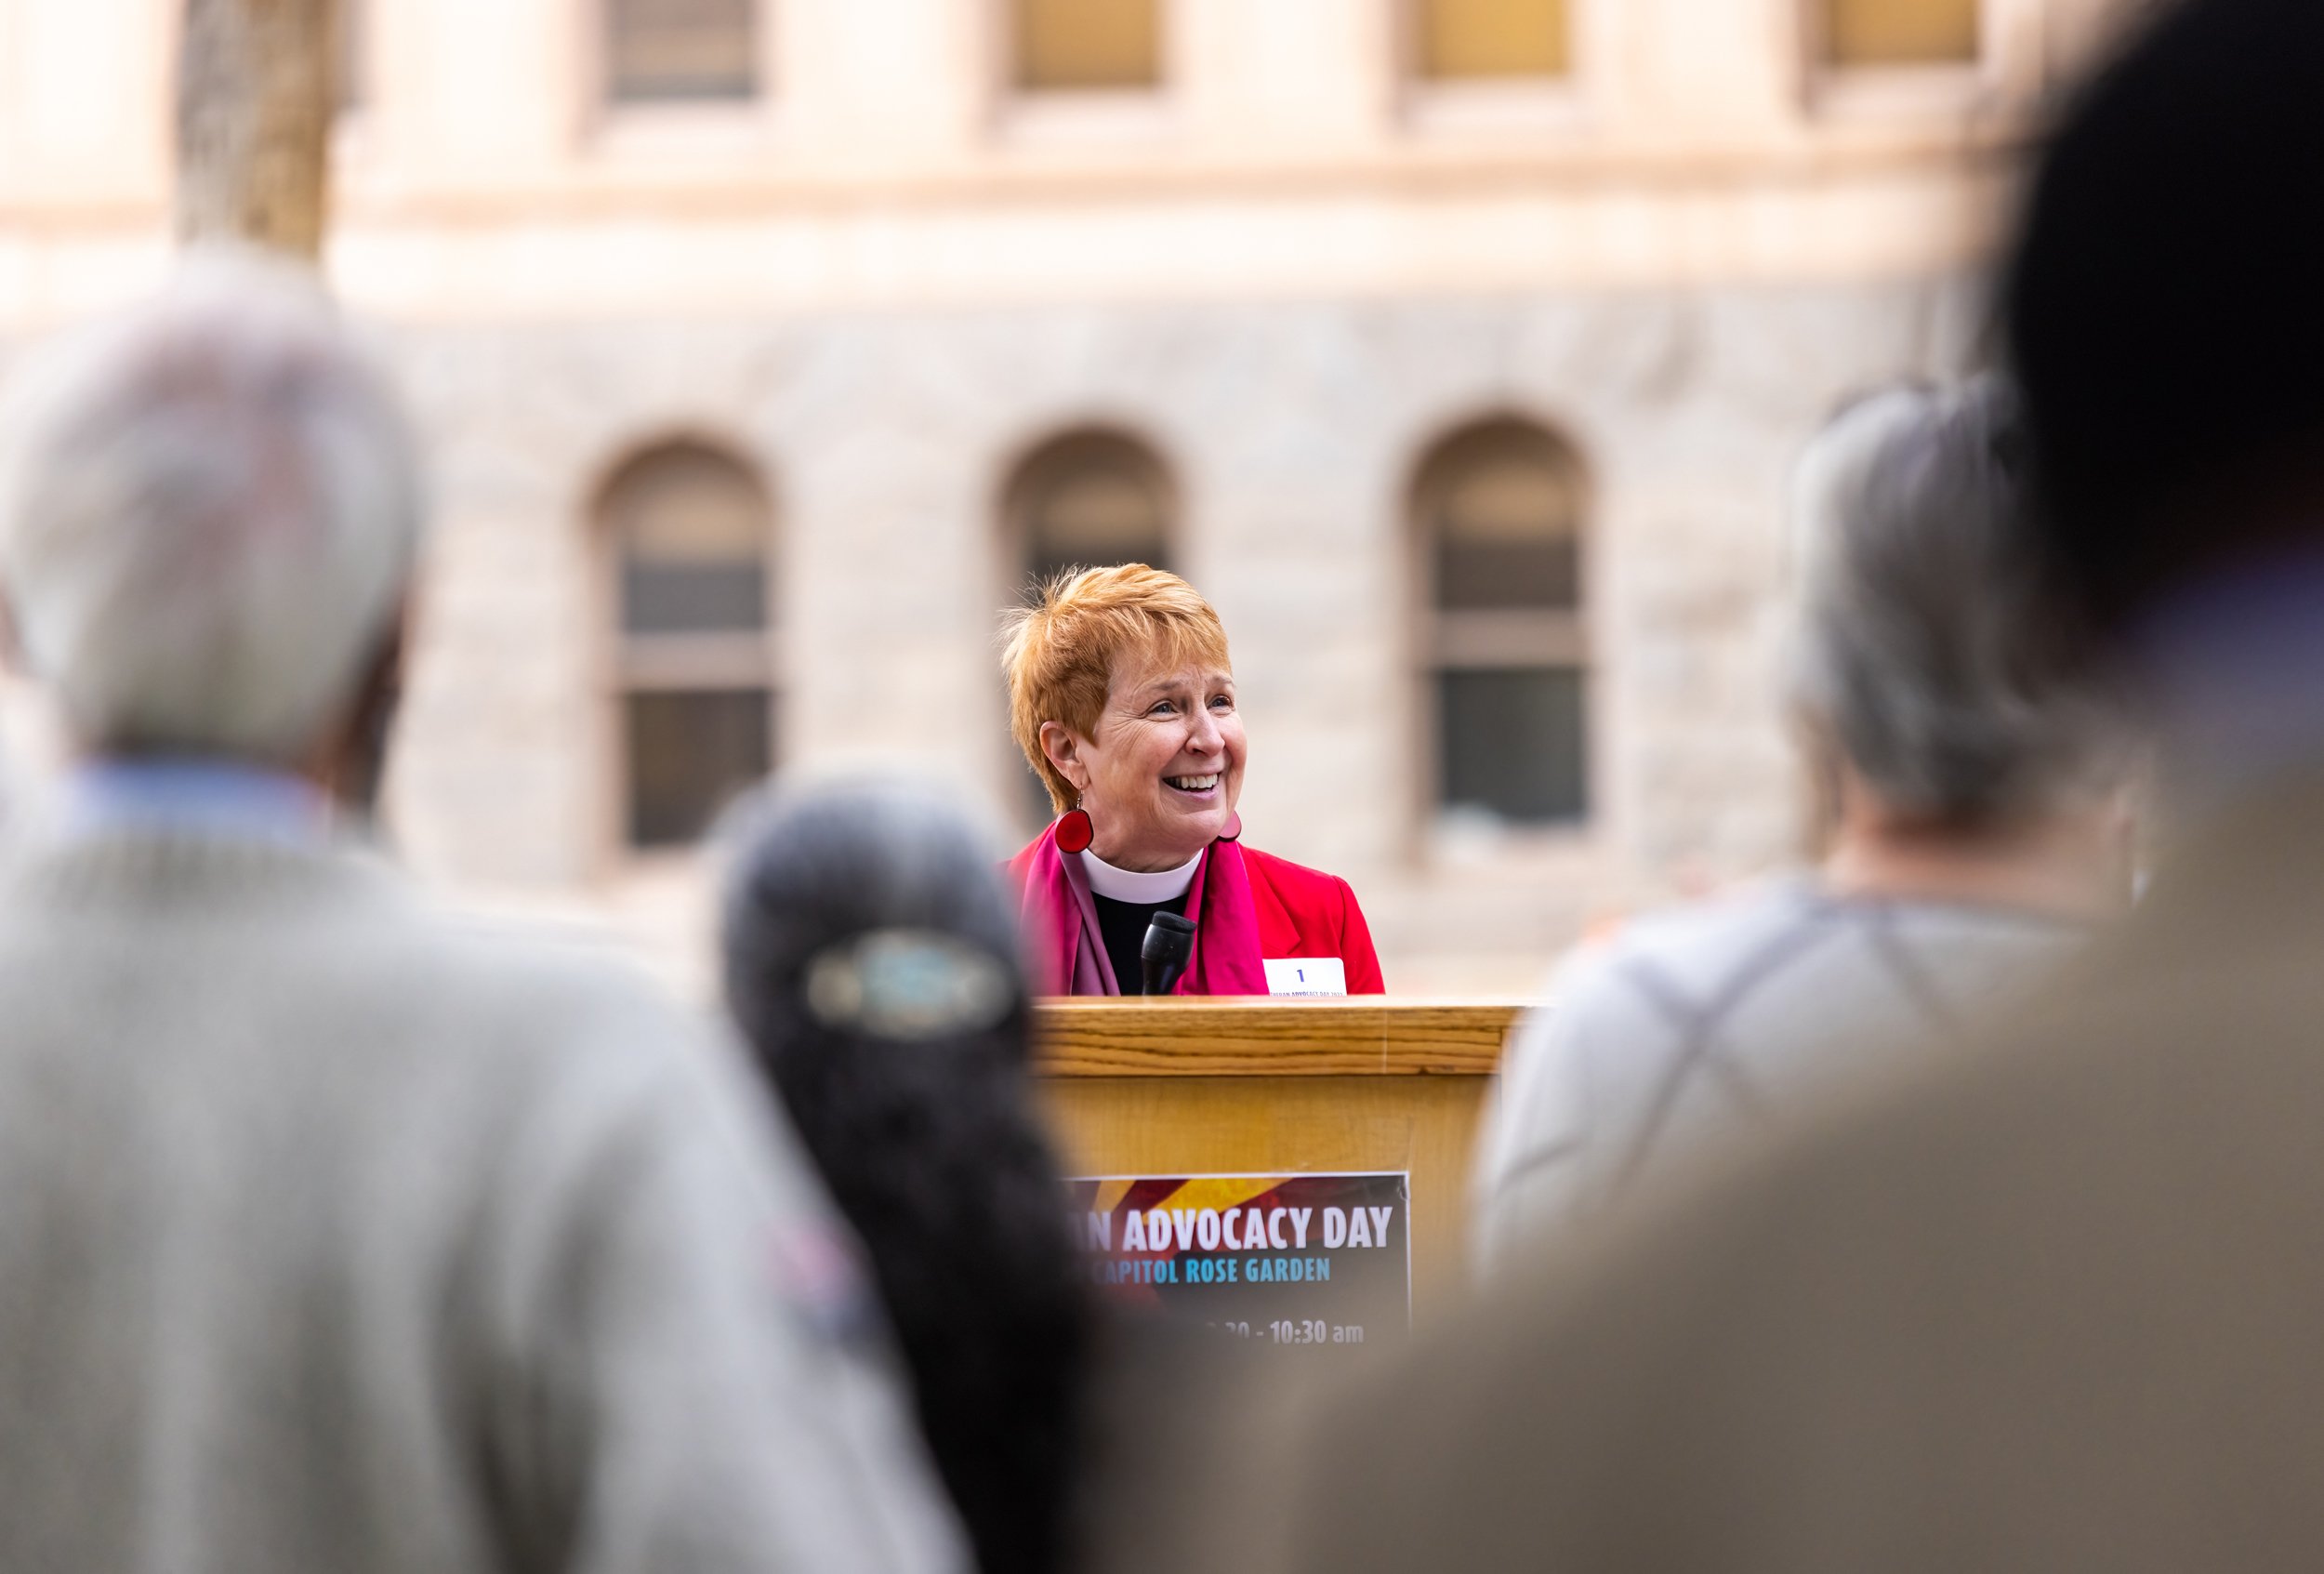  “It was about three years ago the idea of reviving Lutherans to be engaged in advocacy came into being. At the kitchen table of Sarah Payne Naylor, who years ago, ran the advocacy office for the Grand Canyon Synod, a few of us gathered—believing tha